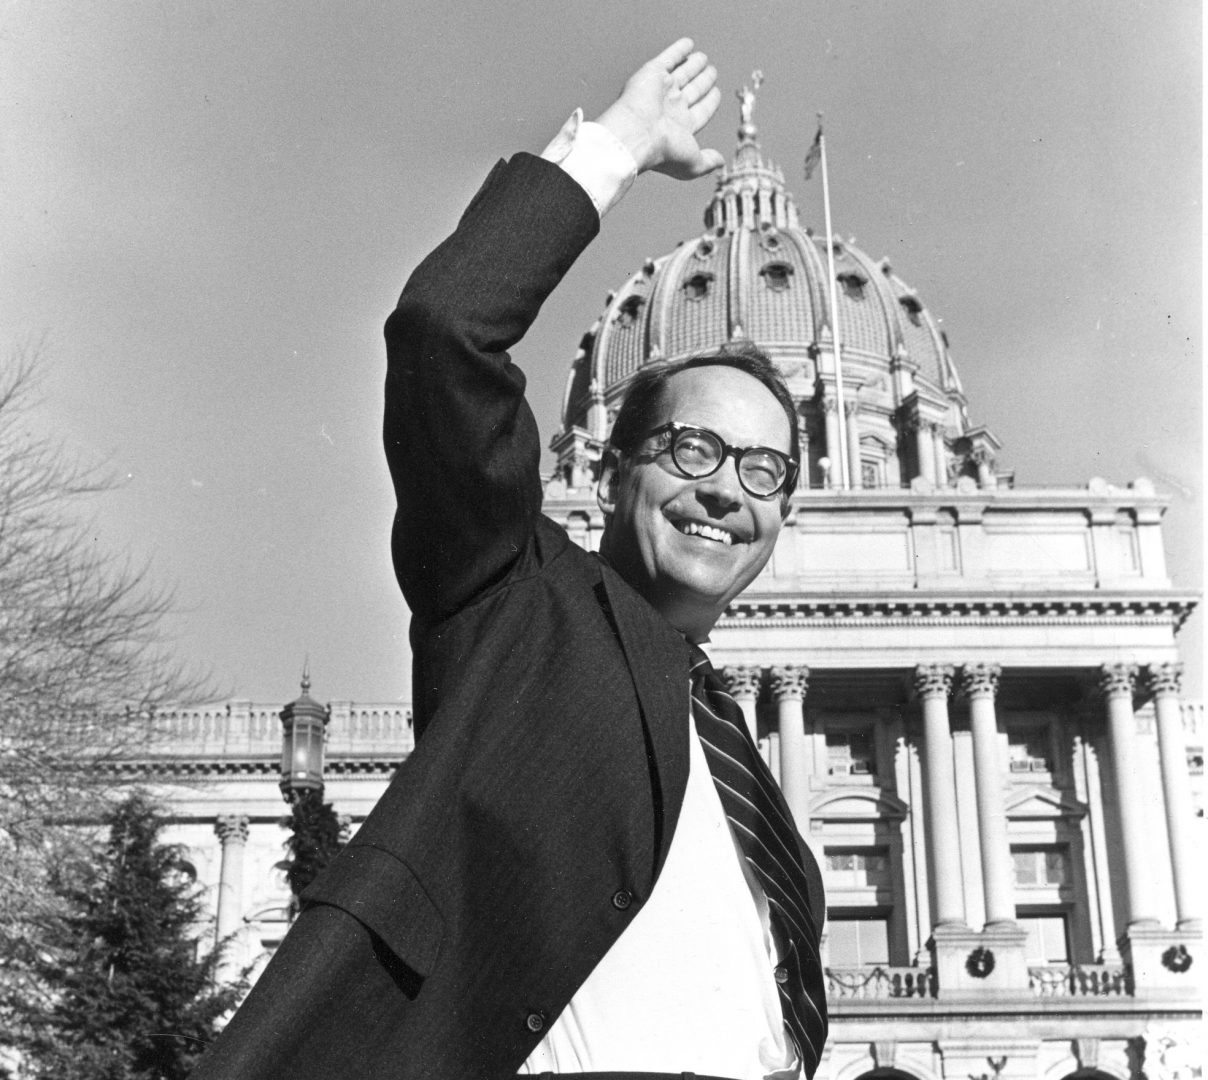 FILE PHOTO: In this Dec. 13, 1978 file photo, Pennsylvania Governor-elect Dick Thornburgh waves at photographers from the front steps of the Sate Capitol in Harrisburg, Pa.  Thornburgh died Thursday, Dec. 31, 2020 at a retirement community facility outside Pittsburgh, his son David said.